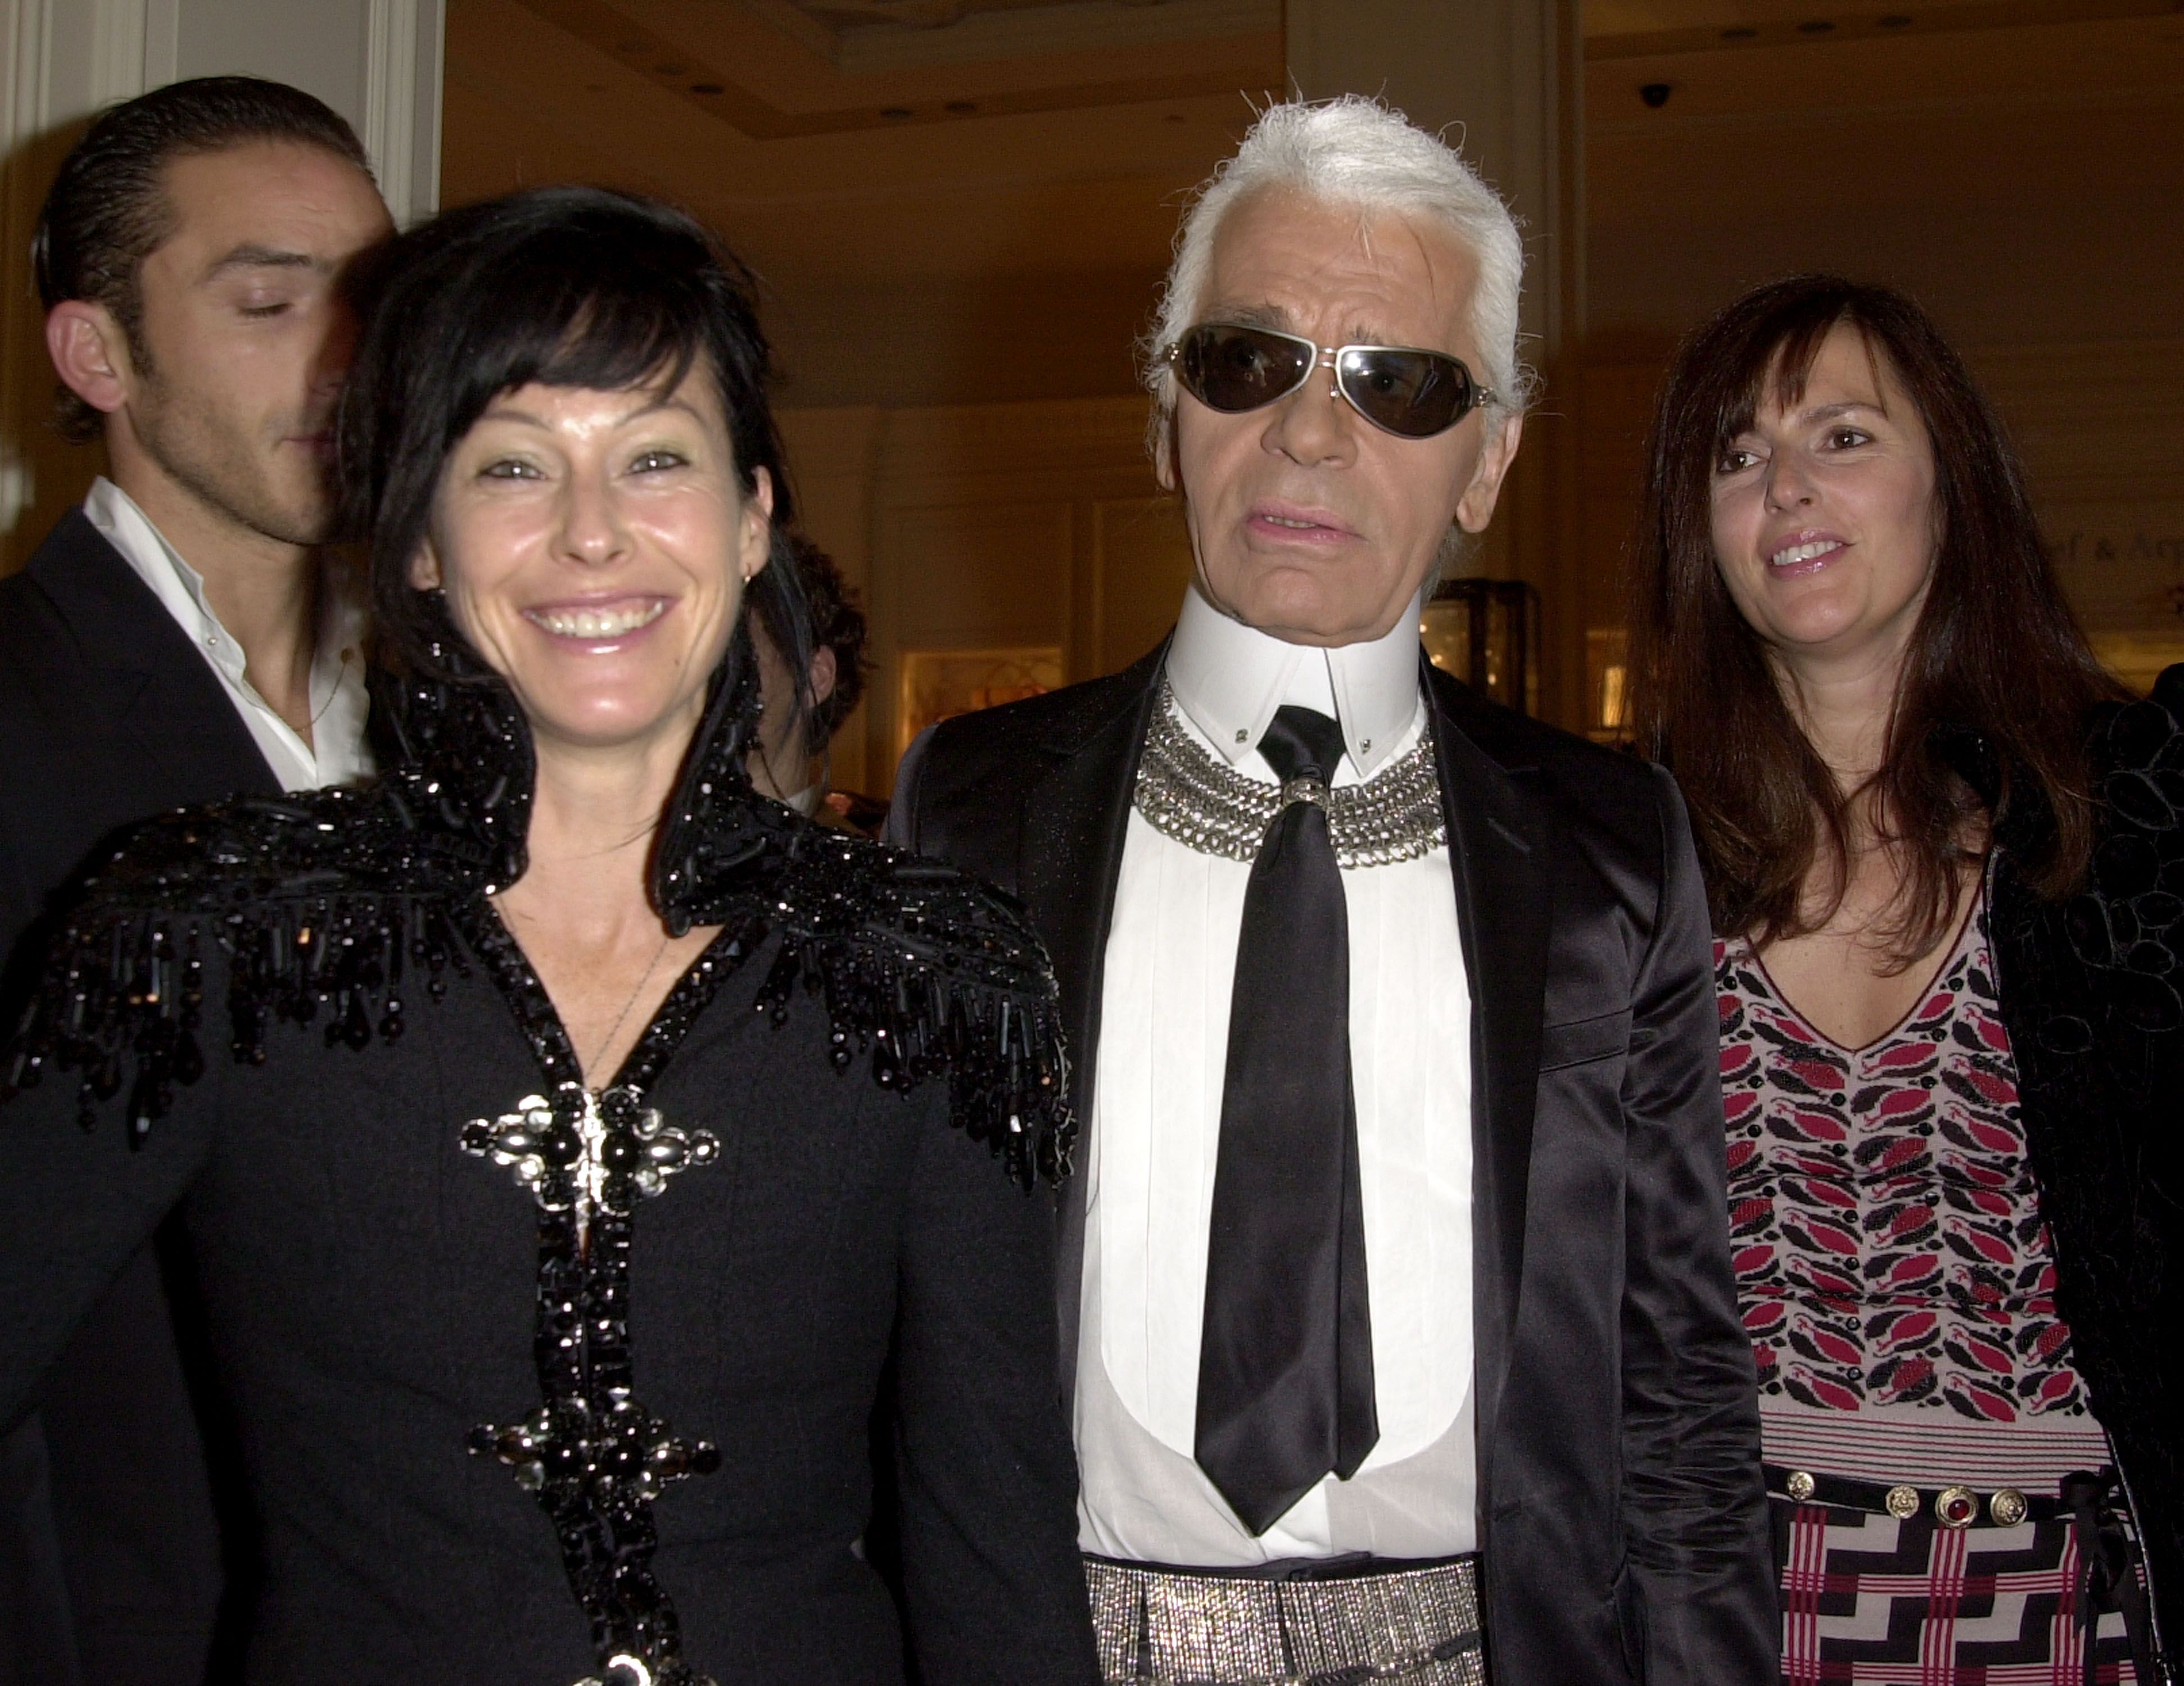 Meet Virginie Viard, the woman to succeed Karl Lagerfeld at Chanel, VOGUE  India